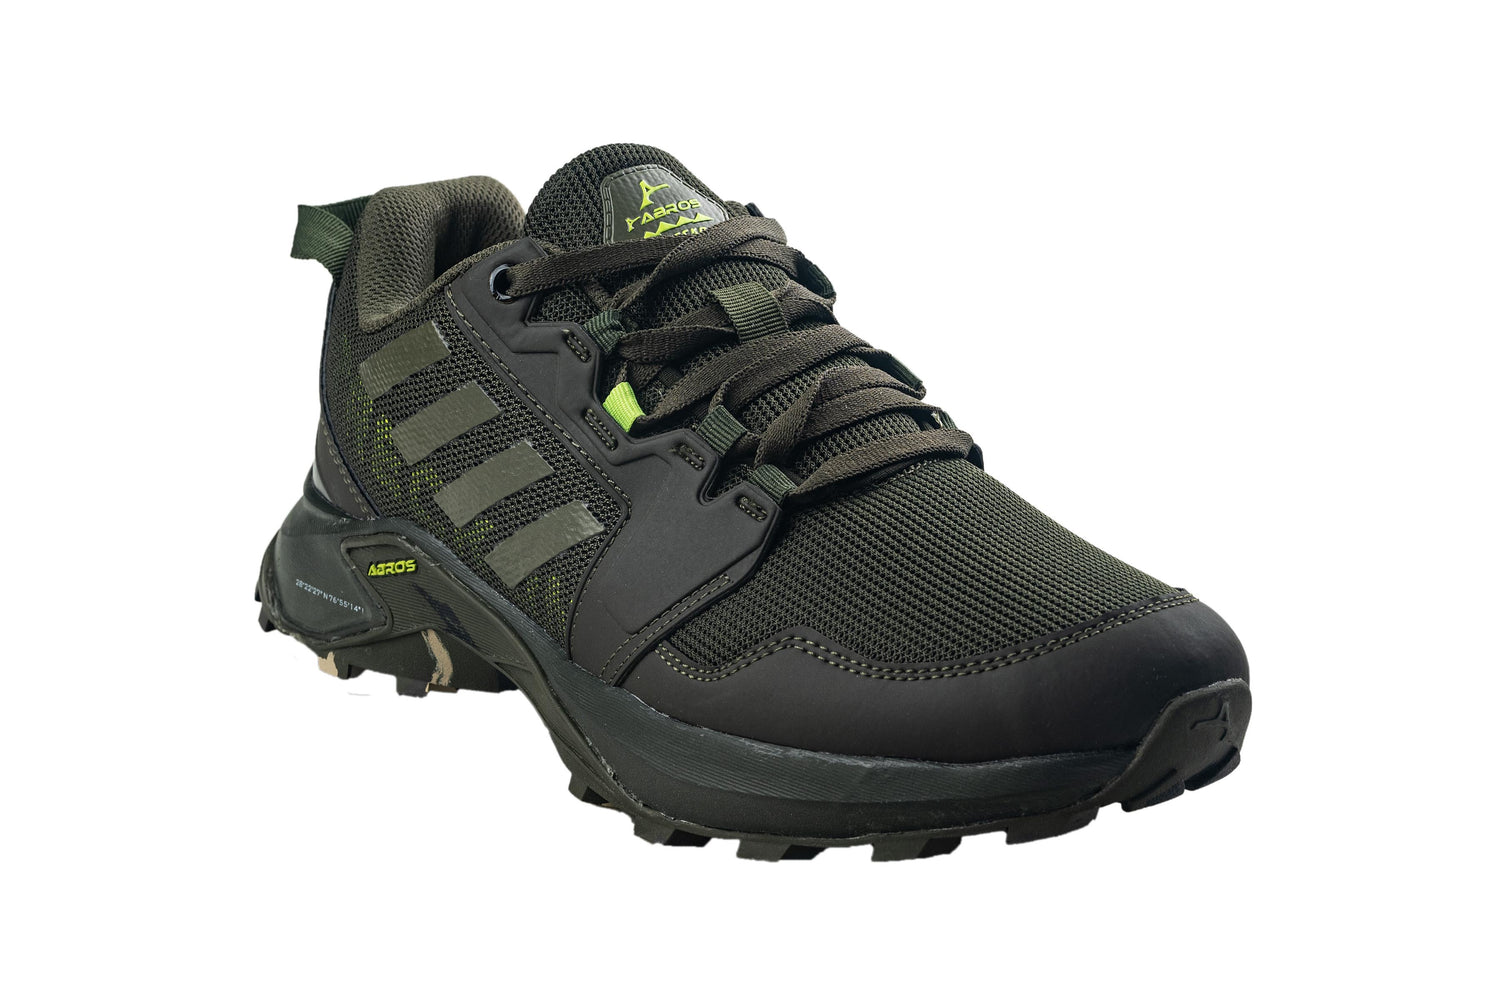 Abros Gents Olive / N. Green Sports Shoe